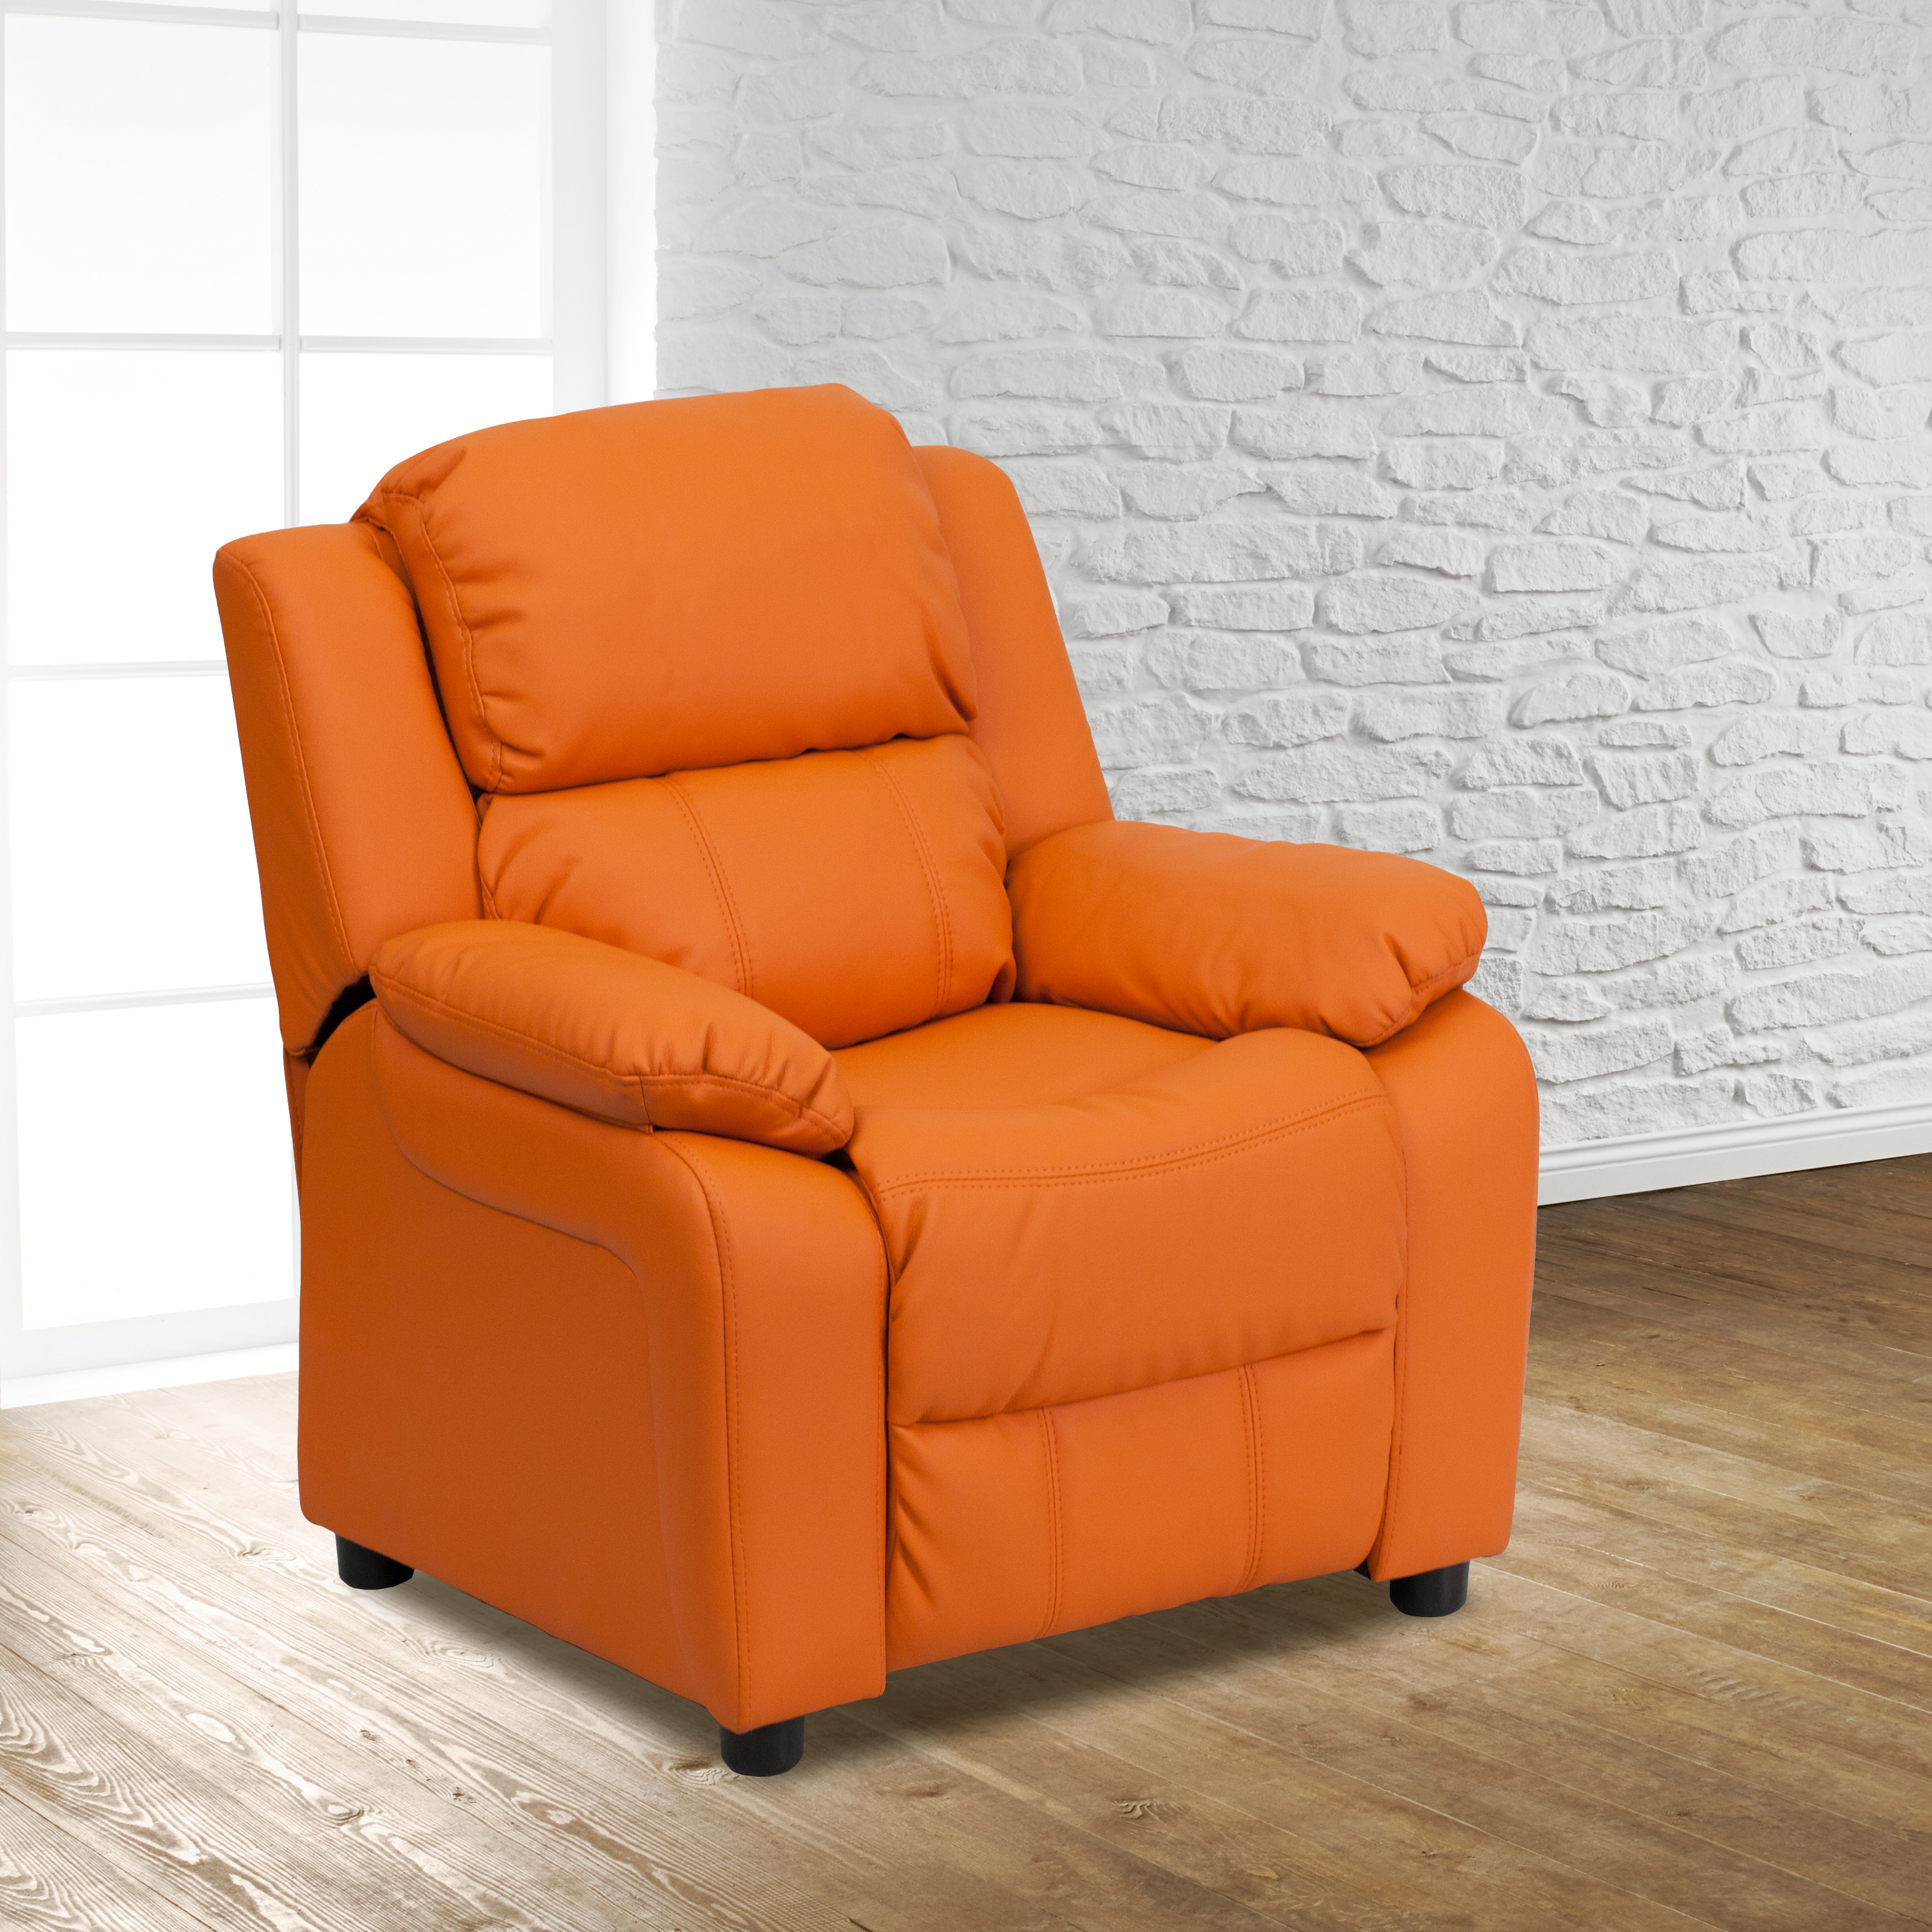 Flash Furniture Deluxe Padded Contemporary Orange Vinyl Kids Recliner with Storage Arms - image 1 of 13